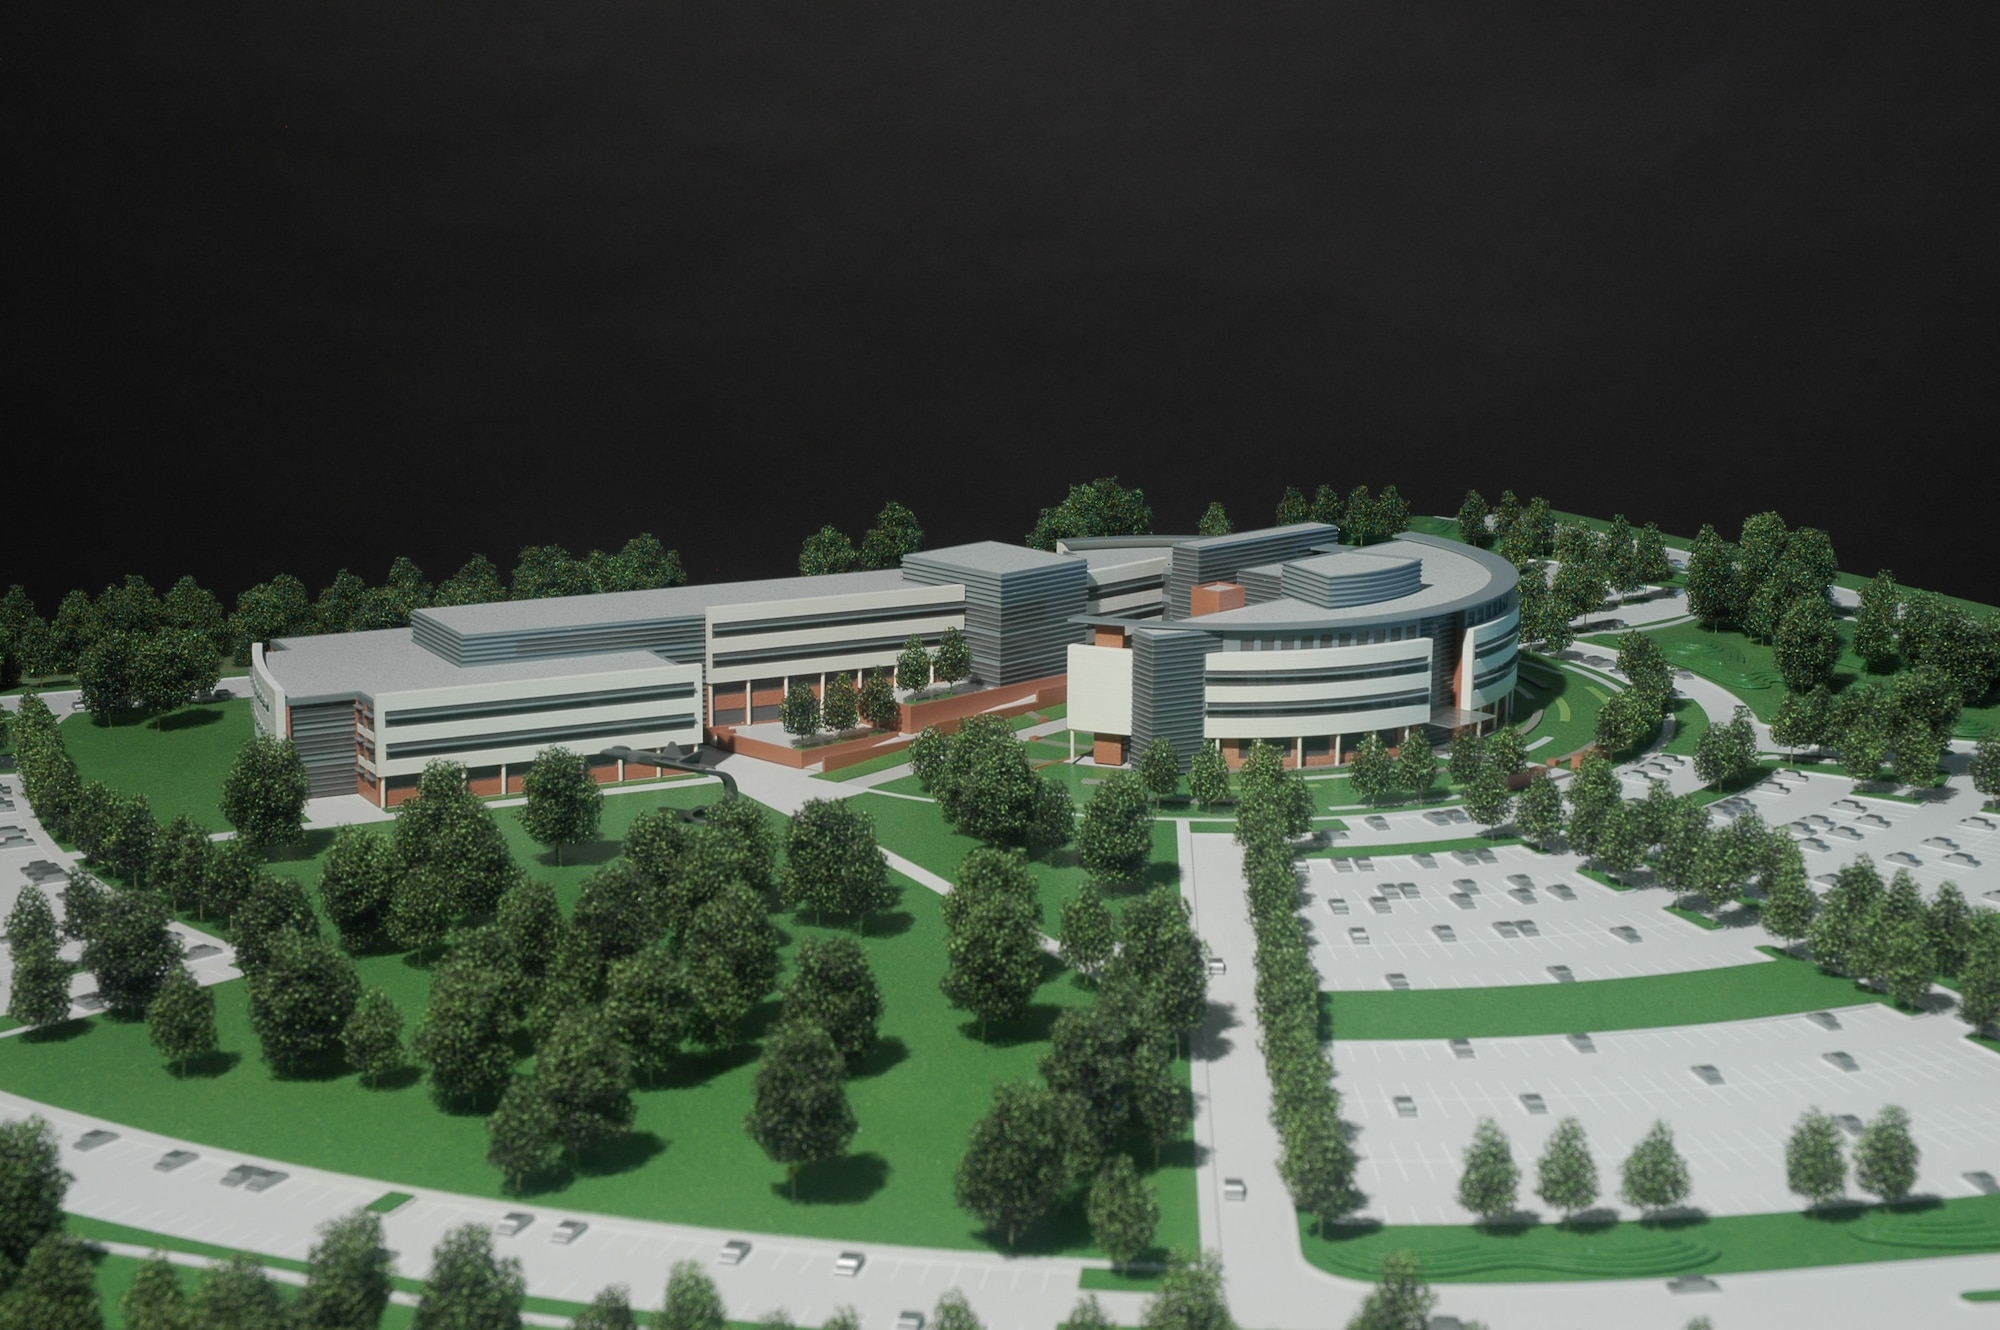 The model of the new Headquarters Air Force Reserve Complex is on display in the current headquarters building. The model was unveiled Nov. 13, 2012, on Robins Air Force Base, Ga. (Courtesy illustration).